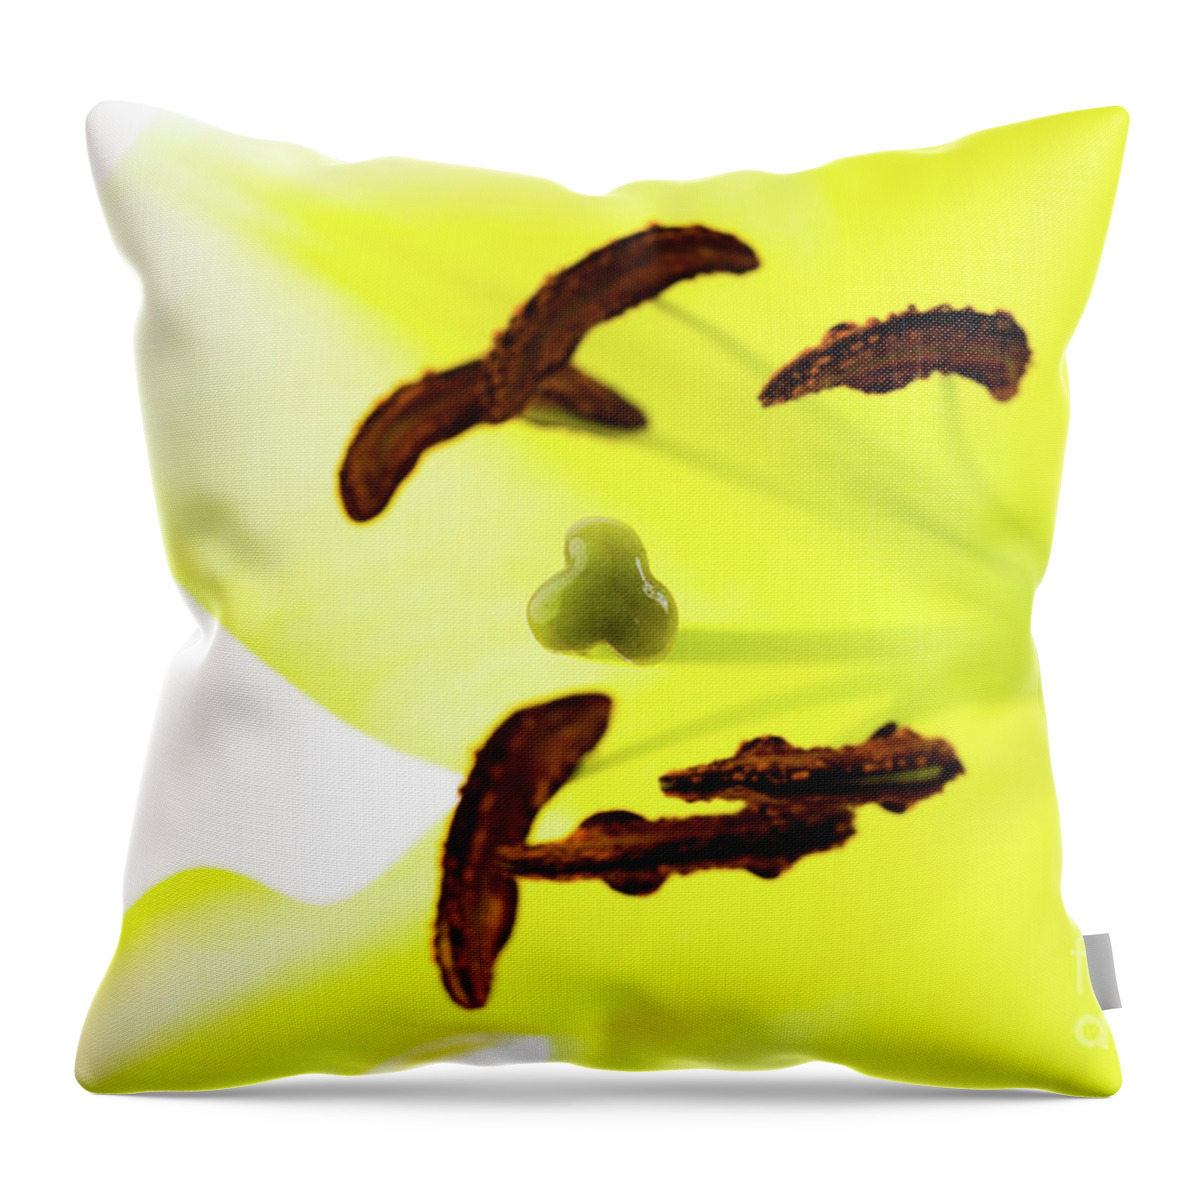 Abstract Throw Pillow featuring the photograph Oriental Lily Flower by Raul Rodriguez